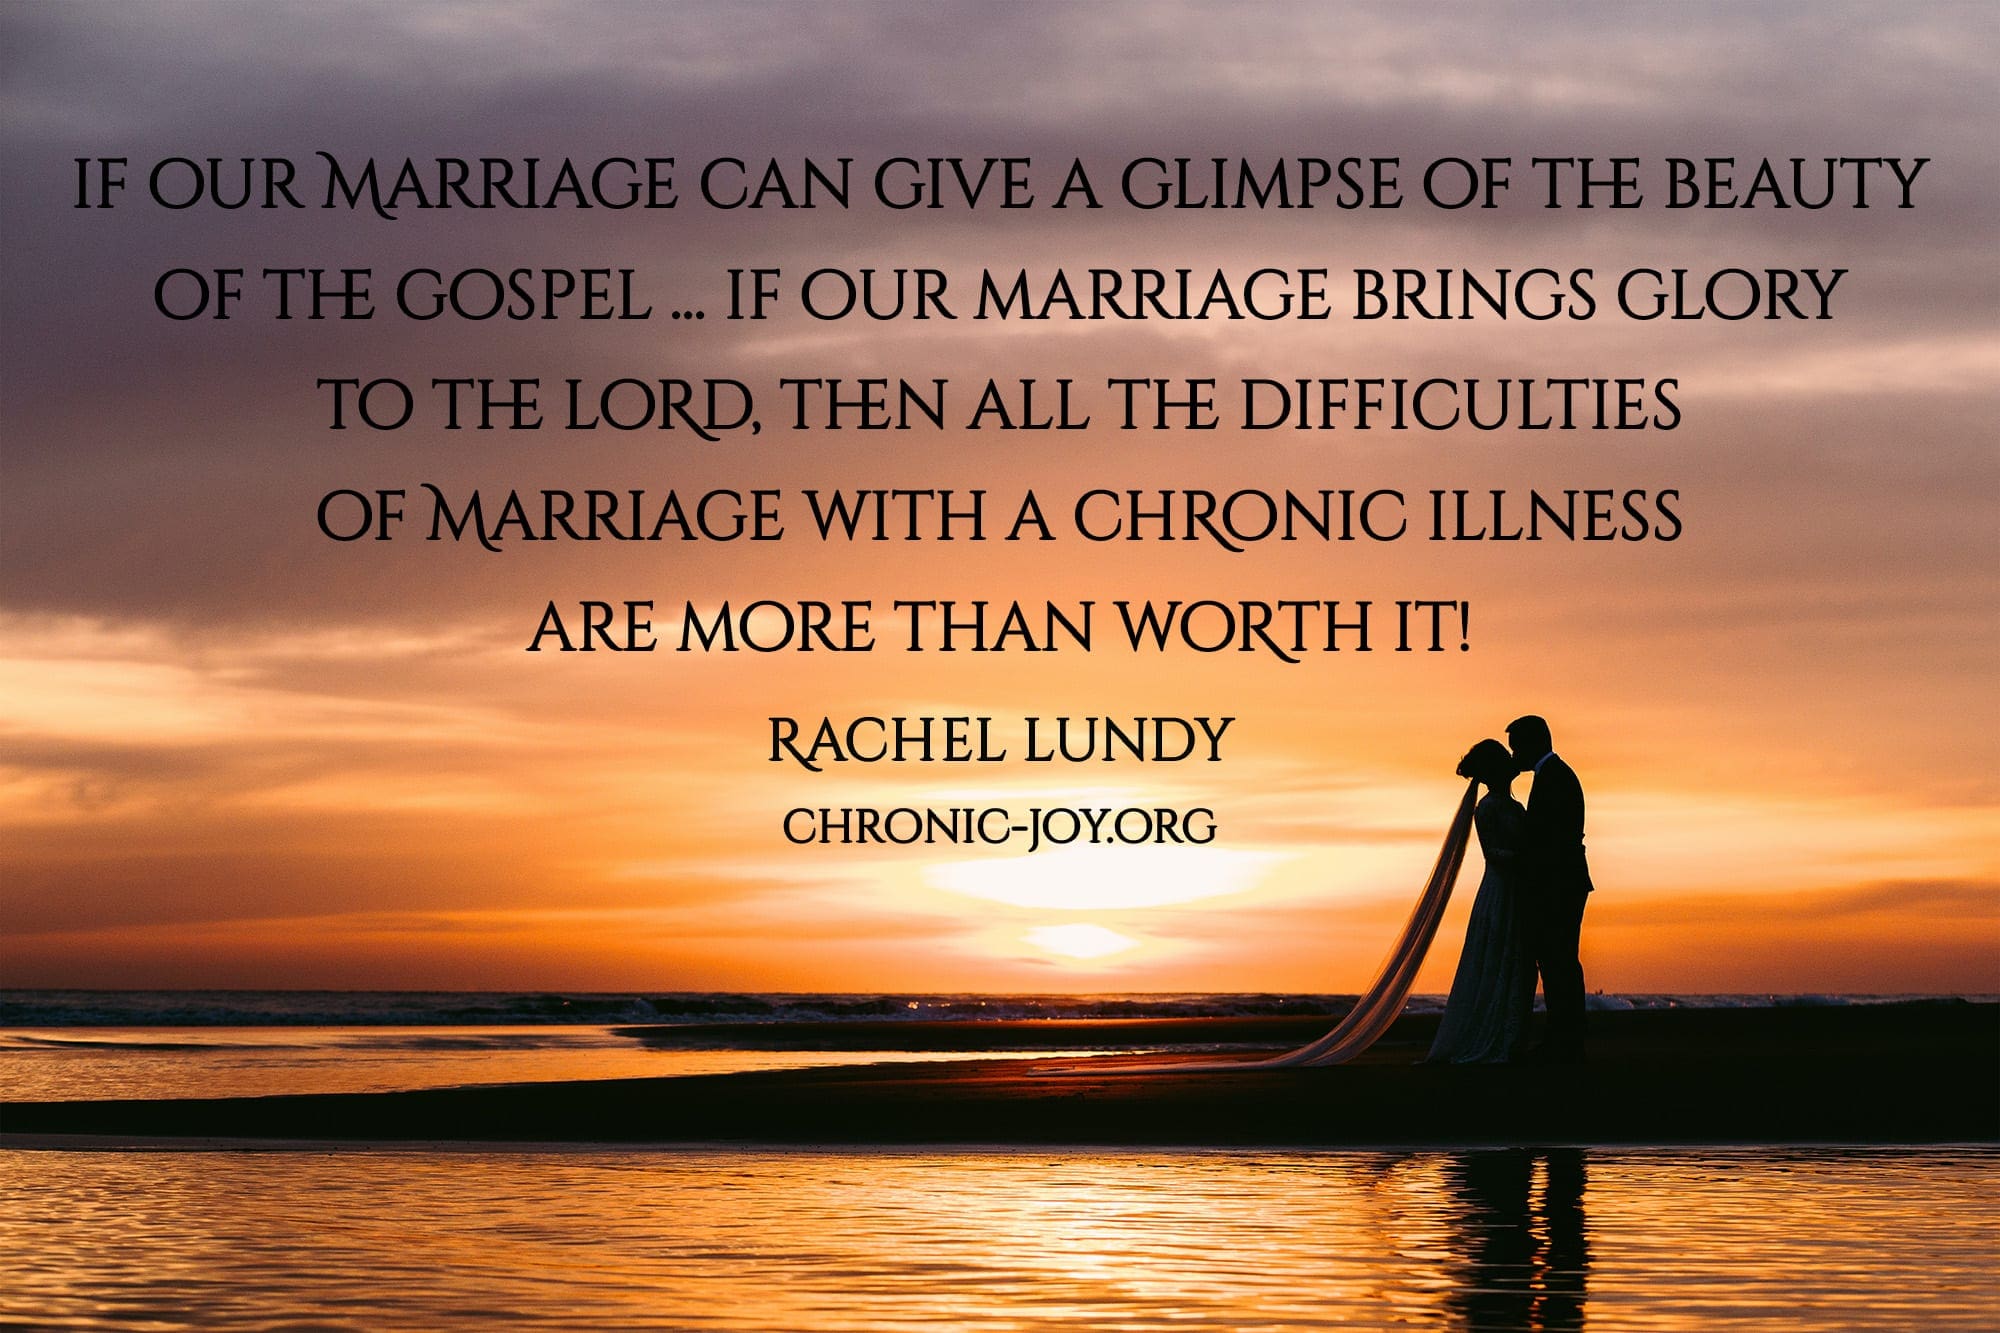 "If our marriage can give a glimpse of the beauty of the gospel ... if our marriage brings glory to the Lord, then all the difficulties of marriage with a chronic illness are more than worth it!" Rachel Lundy